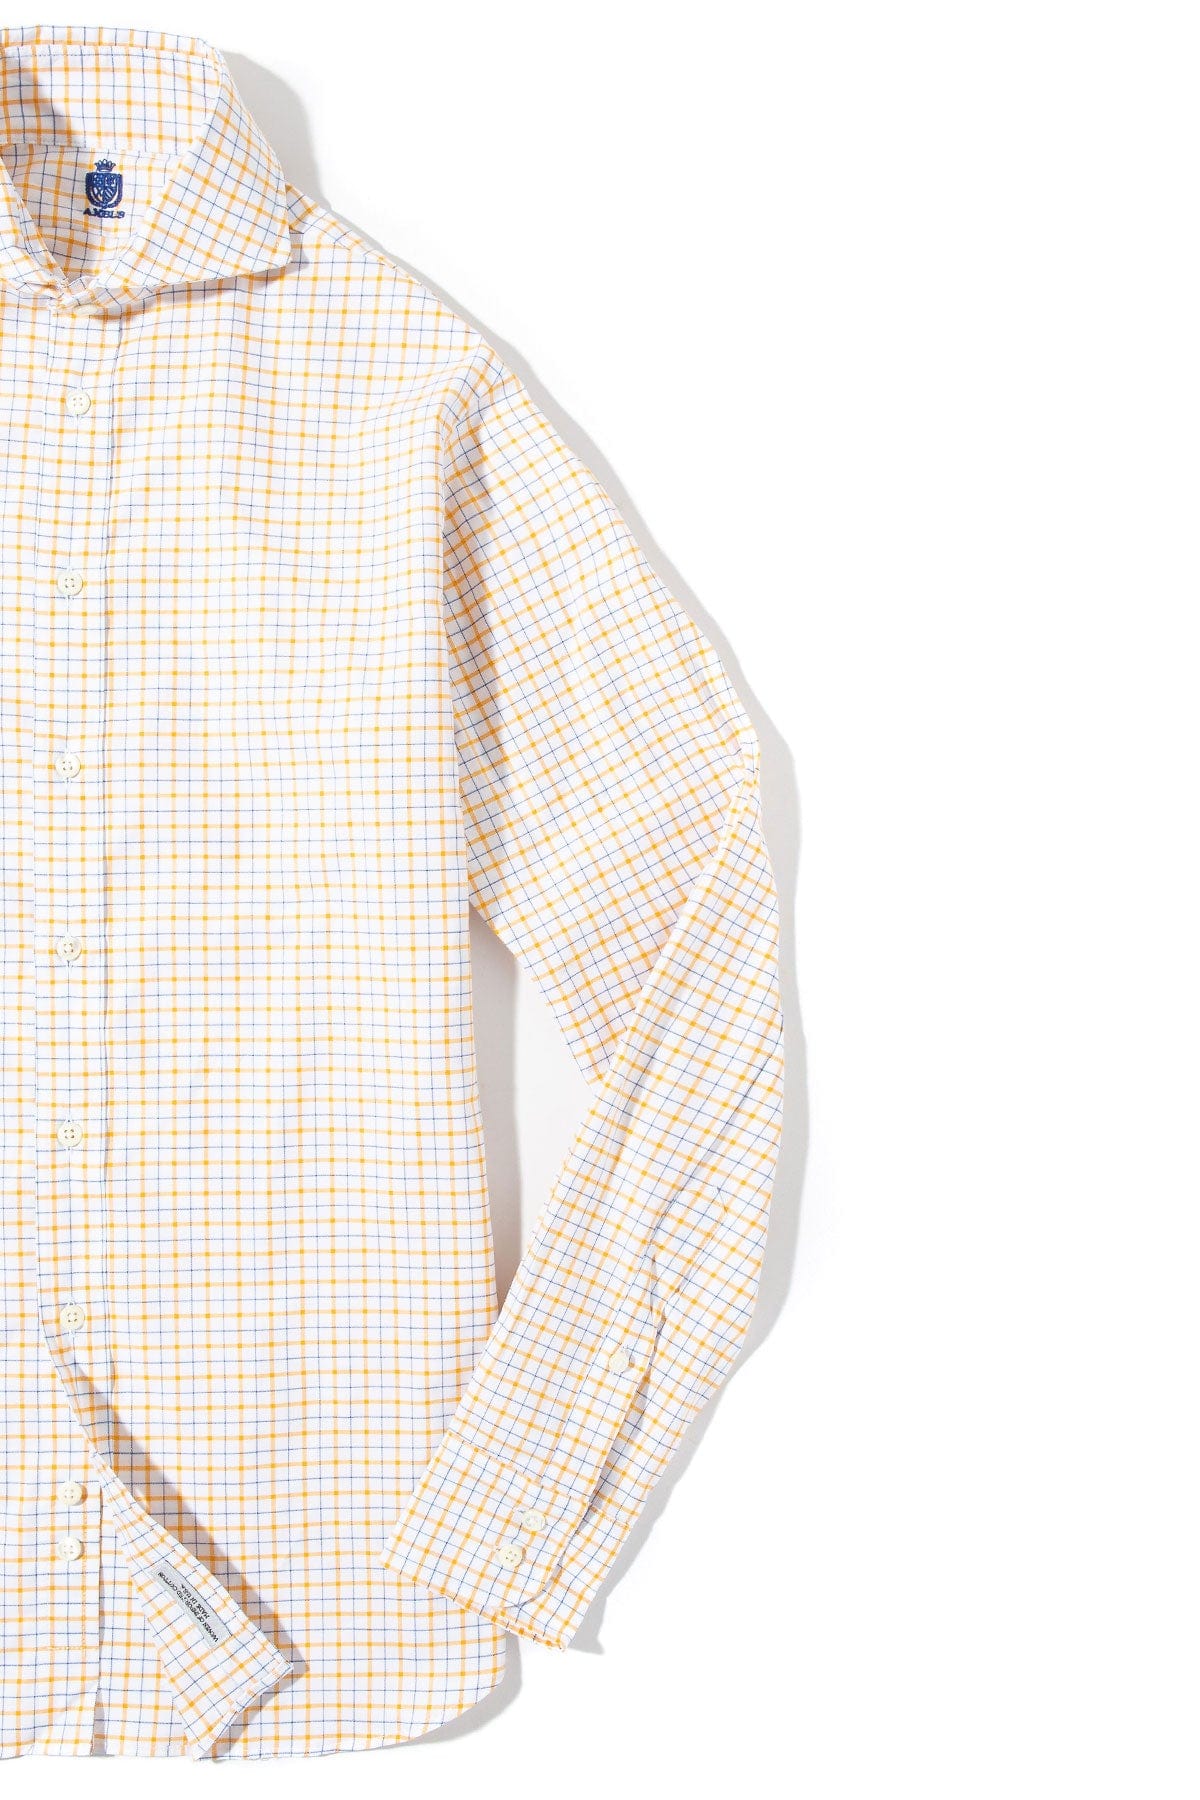 Panamera Cotton Check Shirt In Yellow w Blue - AXEL'S